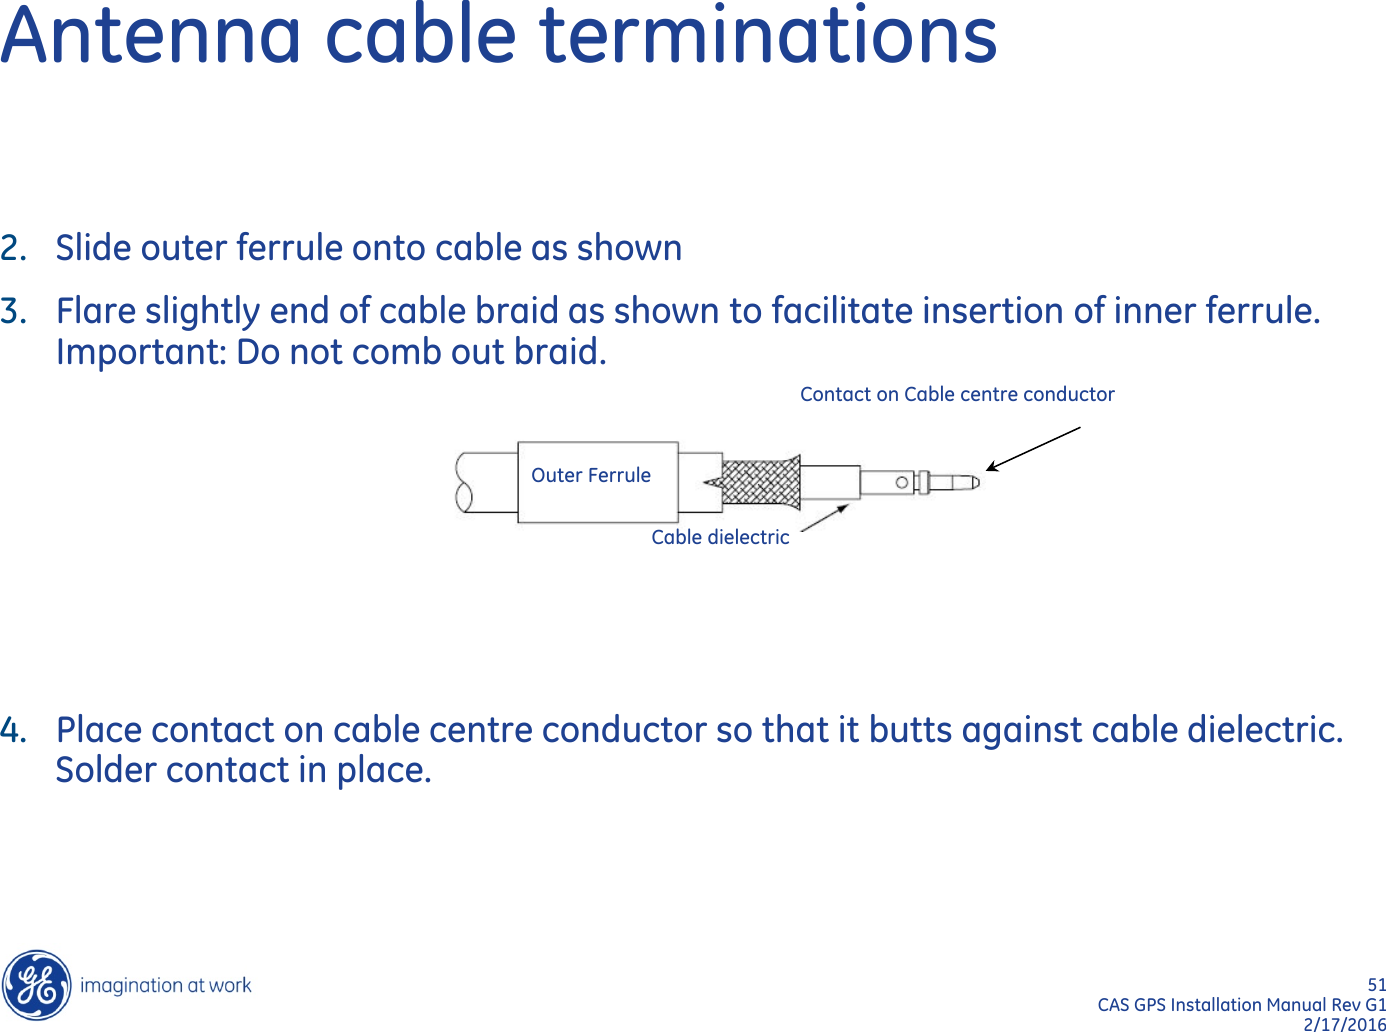 51  CAS GPS Installation Manual Rev G1 2/17/2016 Antenna cable terminations 2. Slide outer ferrule onto cable as shown 3. Flare slightly end of cable braid as shown to facilitate insertion of inner ferrule. Important: Do not comb out braid.      4. Place contact on cable centre conductor so that it butts against cable dielectric. Solder contact in place.   Outer Ferrule Cable dielectric Contact on Cable centre conductor 